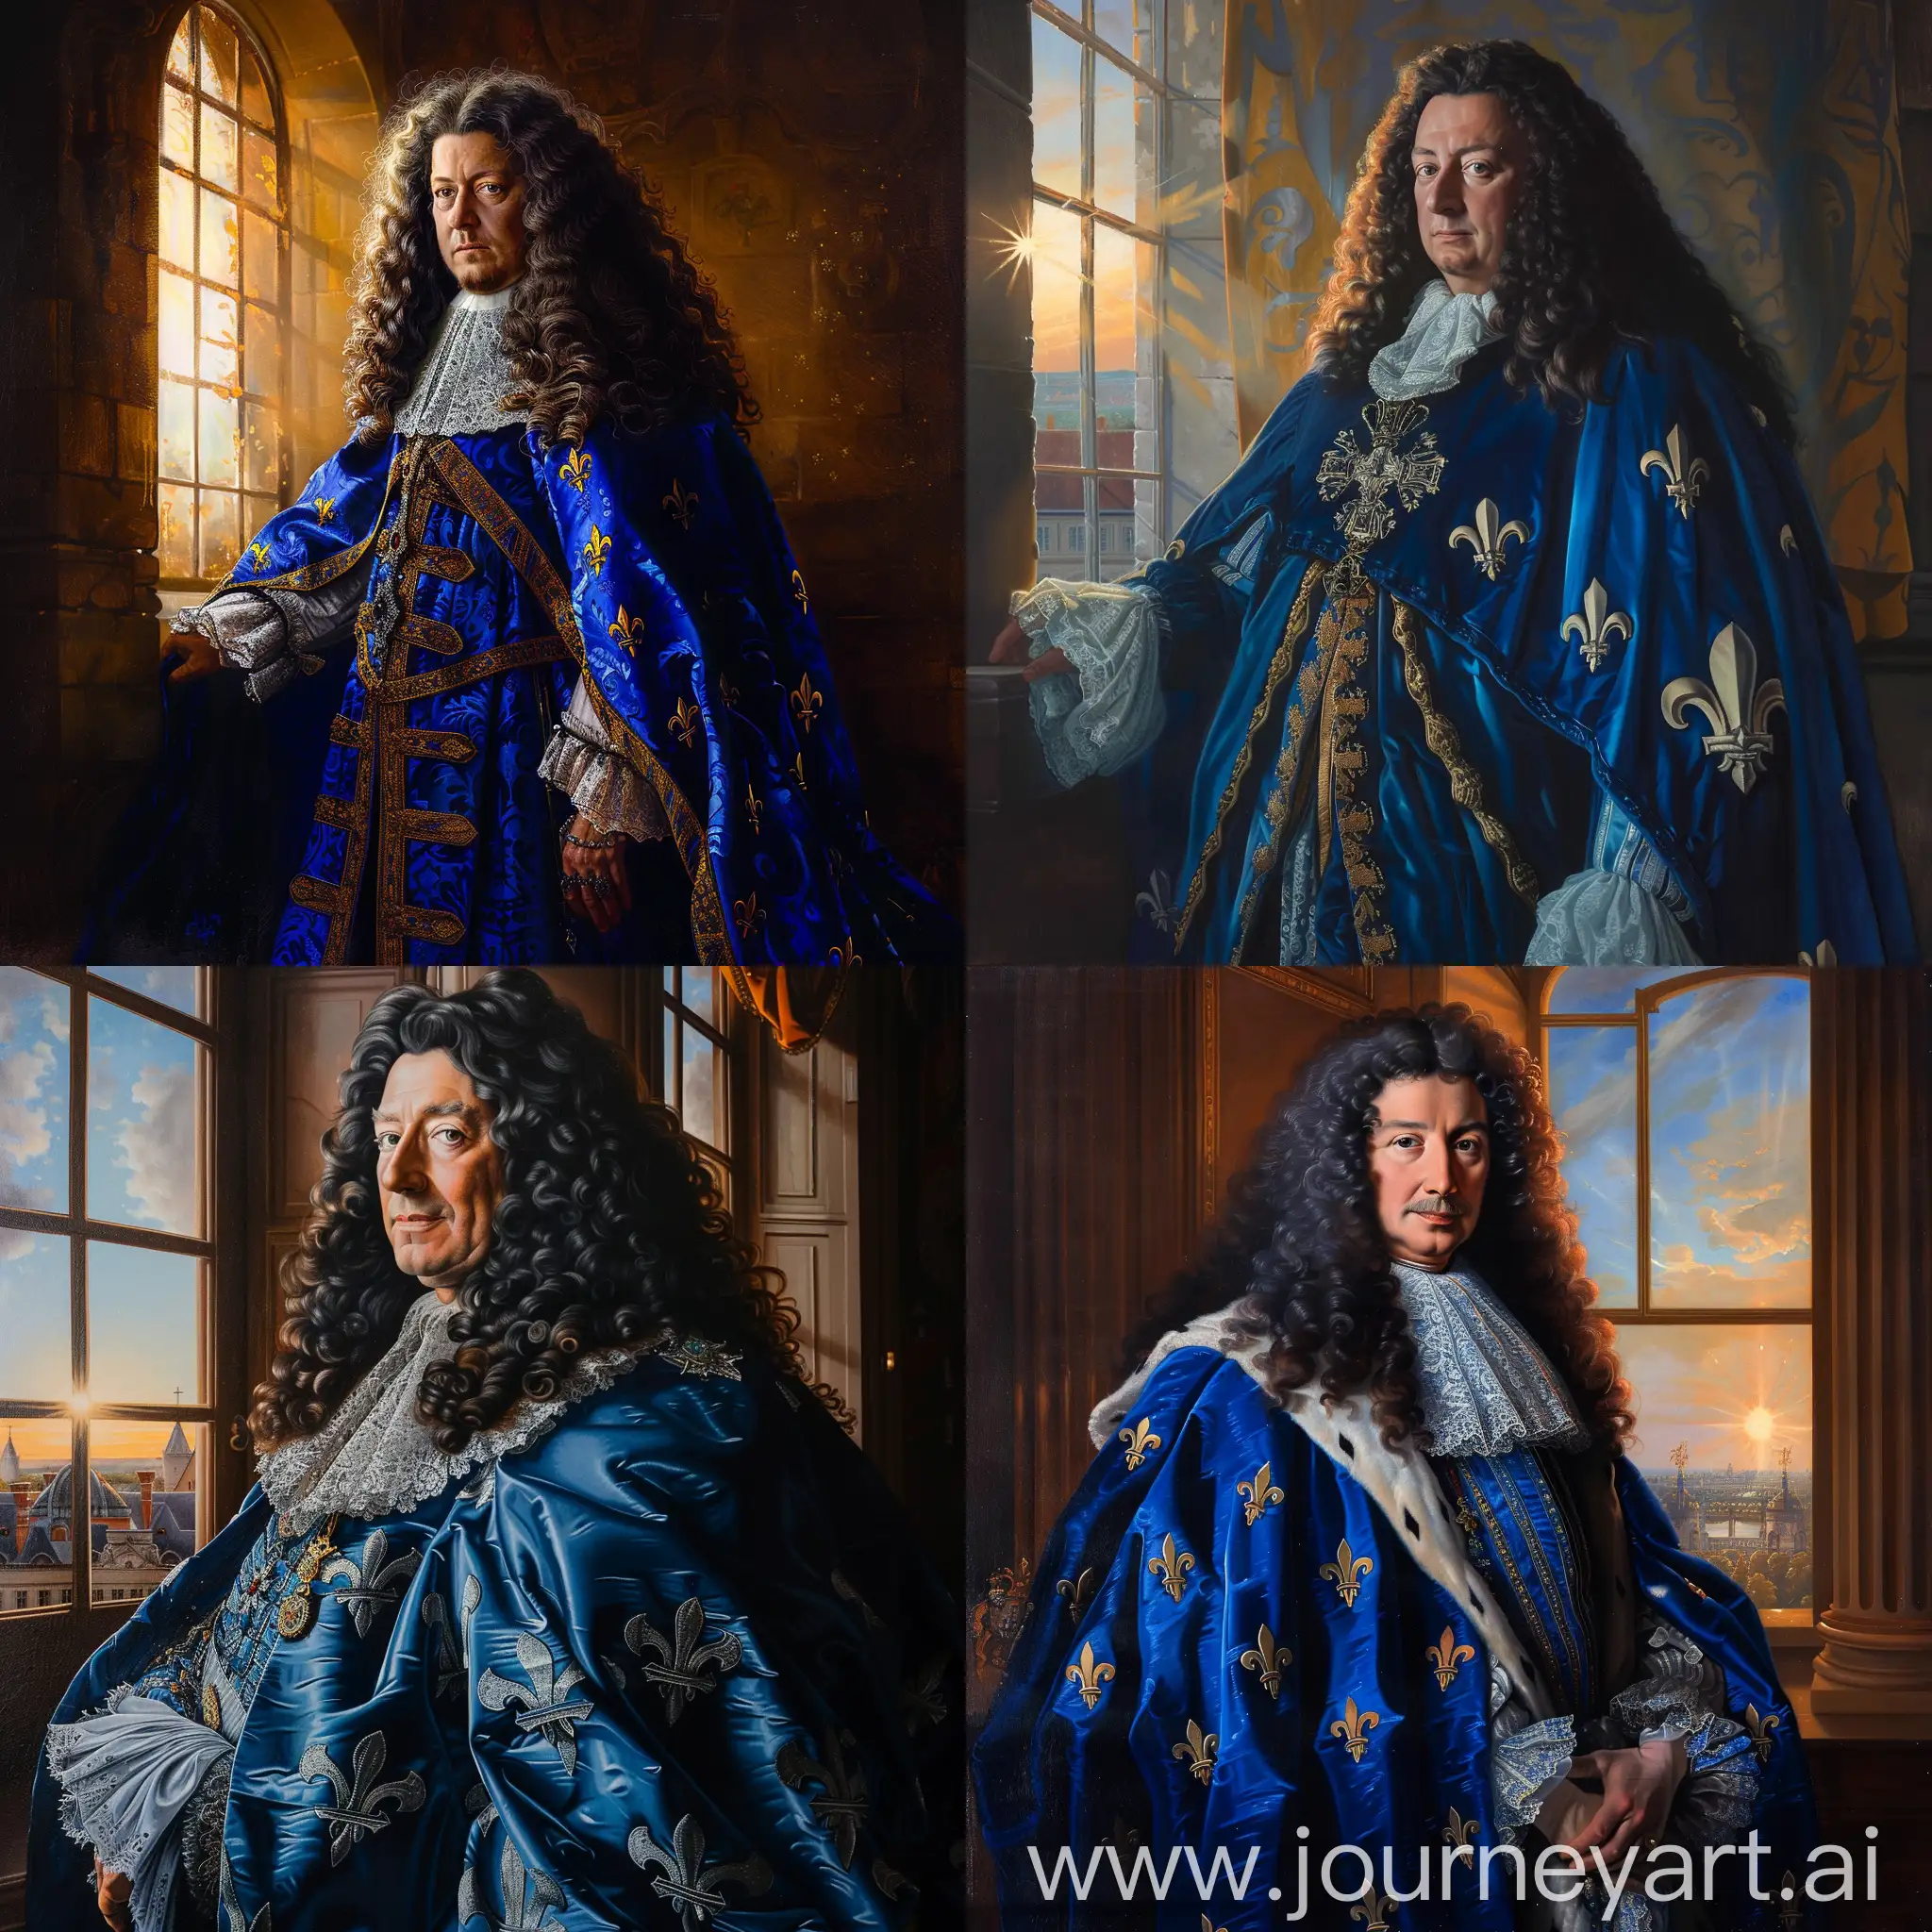 Luxurious-Portrait-of-Louis-XIV-King-of-France-in-Regal-Robes-and-Iconic-Blue-Cape